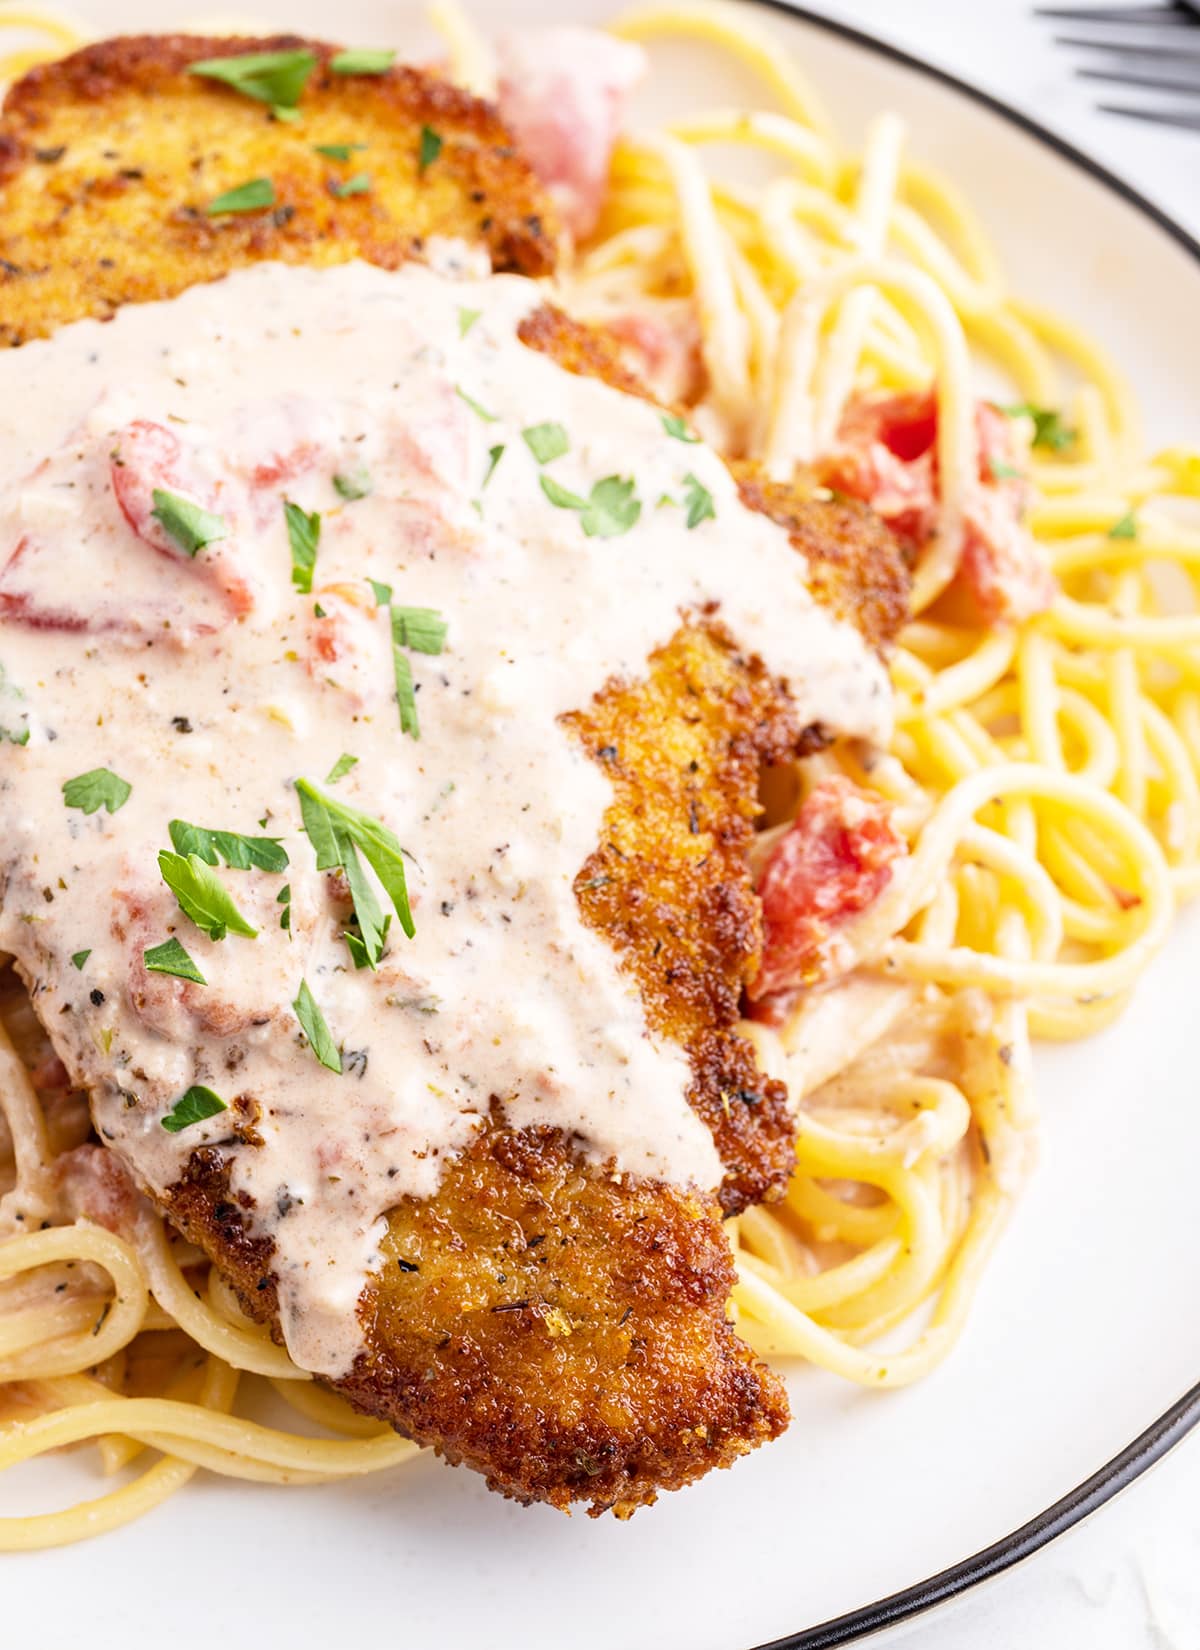 A close up of a breaded chicken breast on spaghetti noodles. It's topped with a pink tomato sauce and fresh cut parsley.